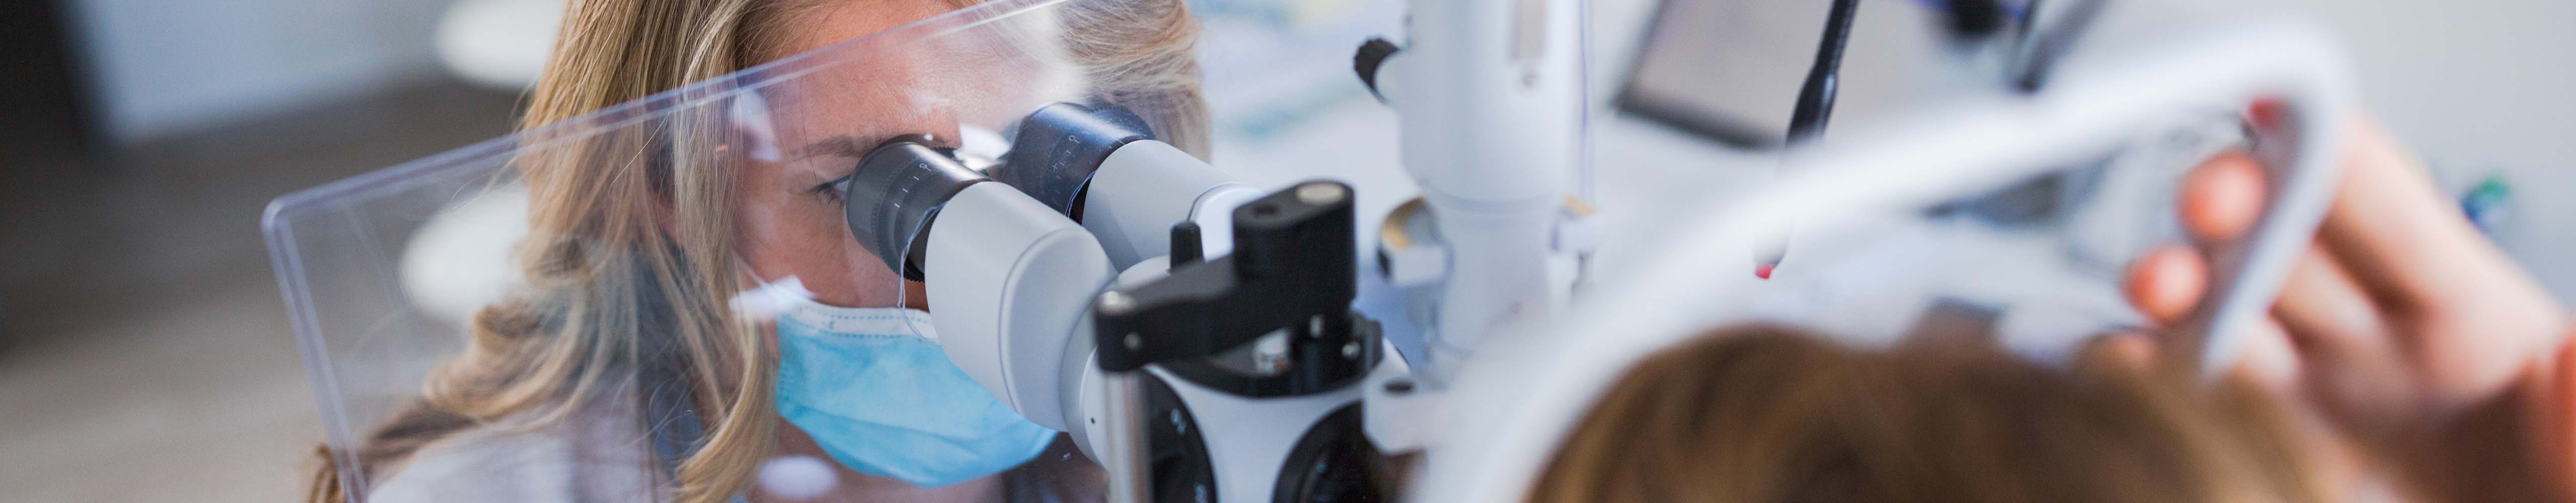 A healthcare professional conducts an eye examination using specialized optical equipment.